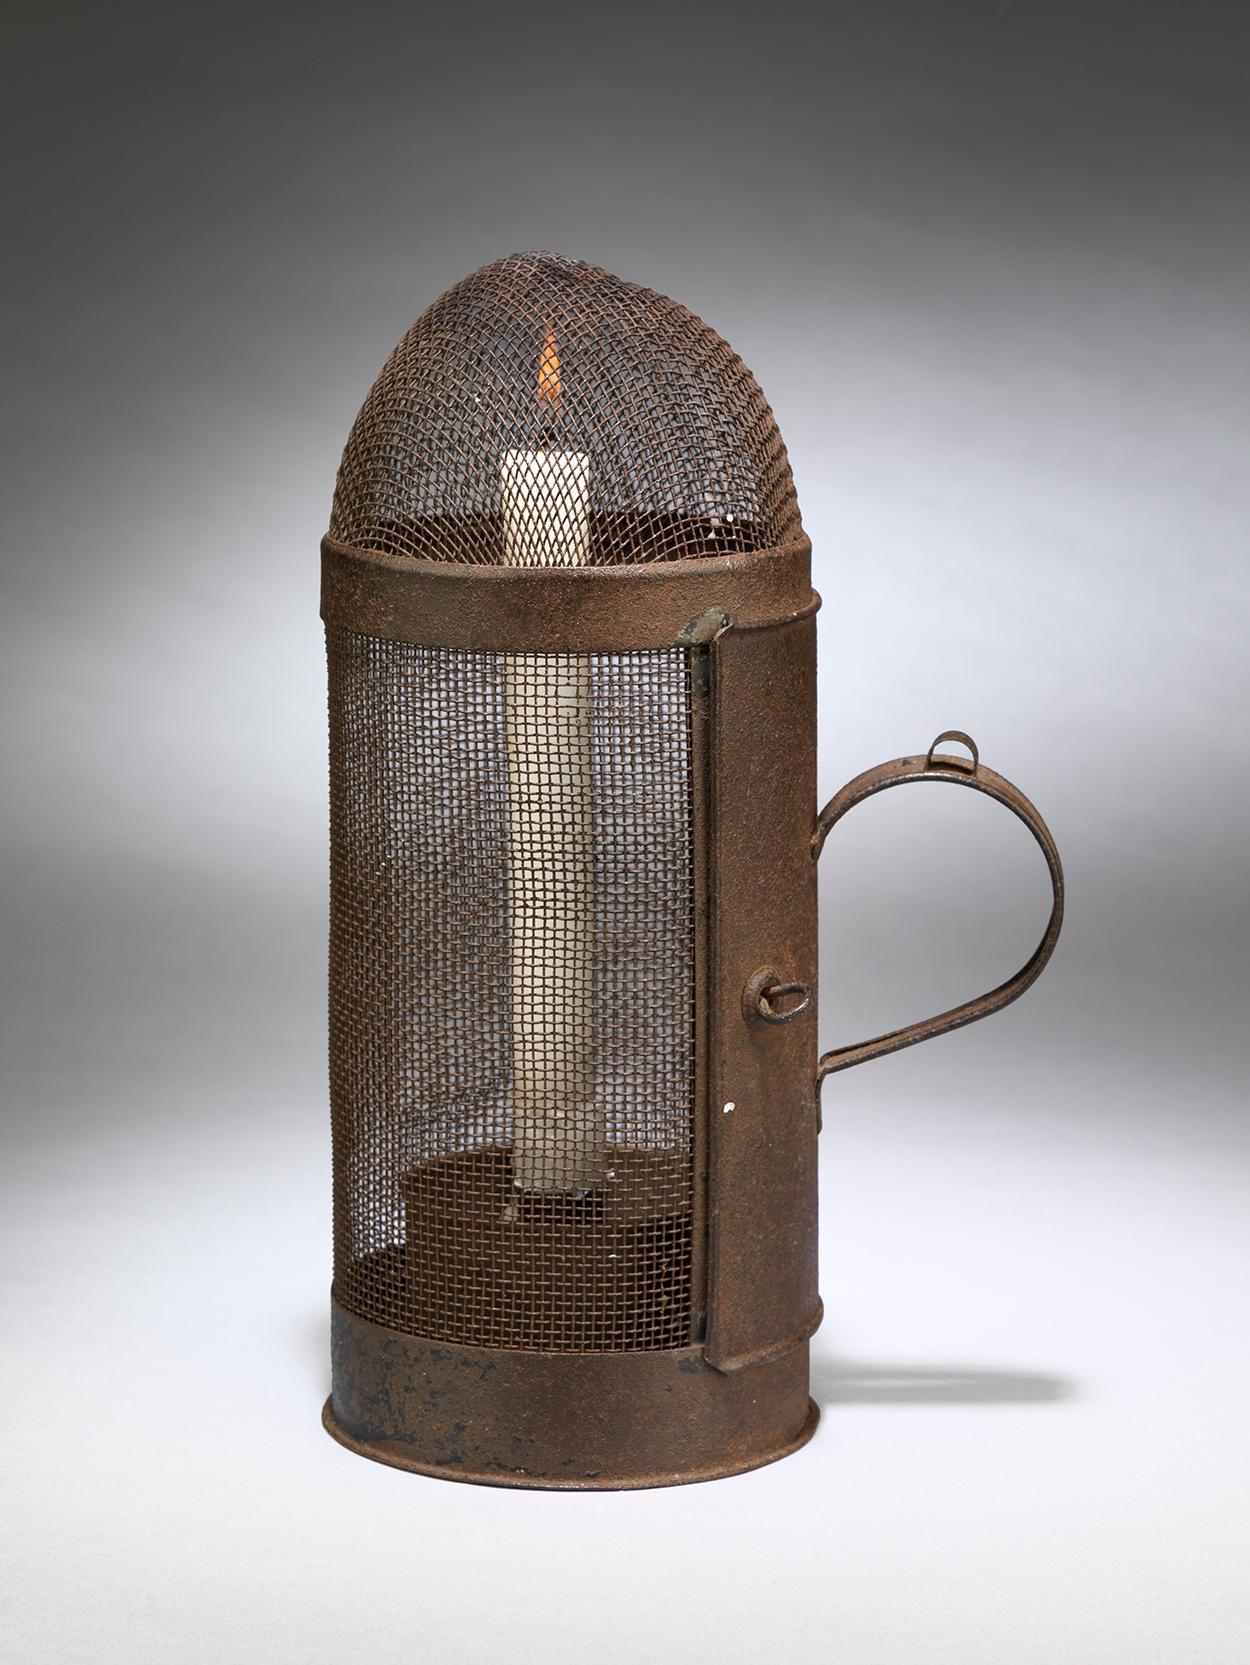 Rare Dome Topped Candle Lantern or Stable Light